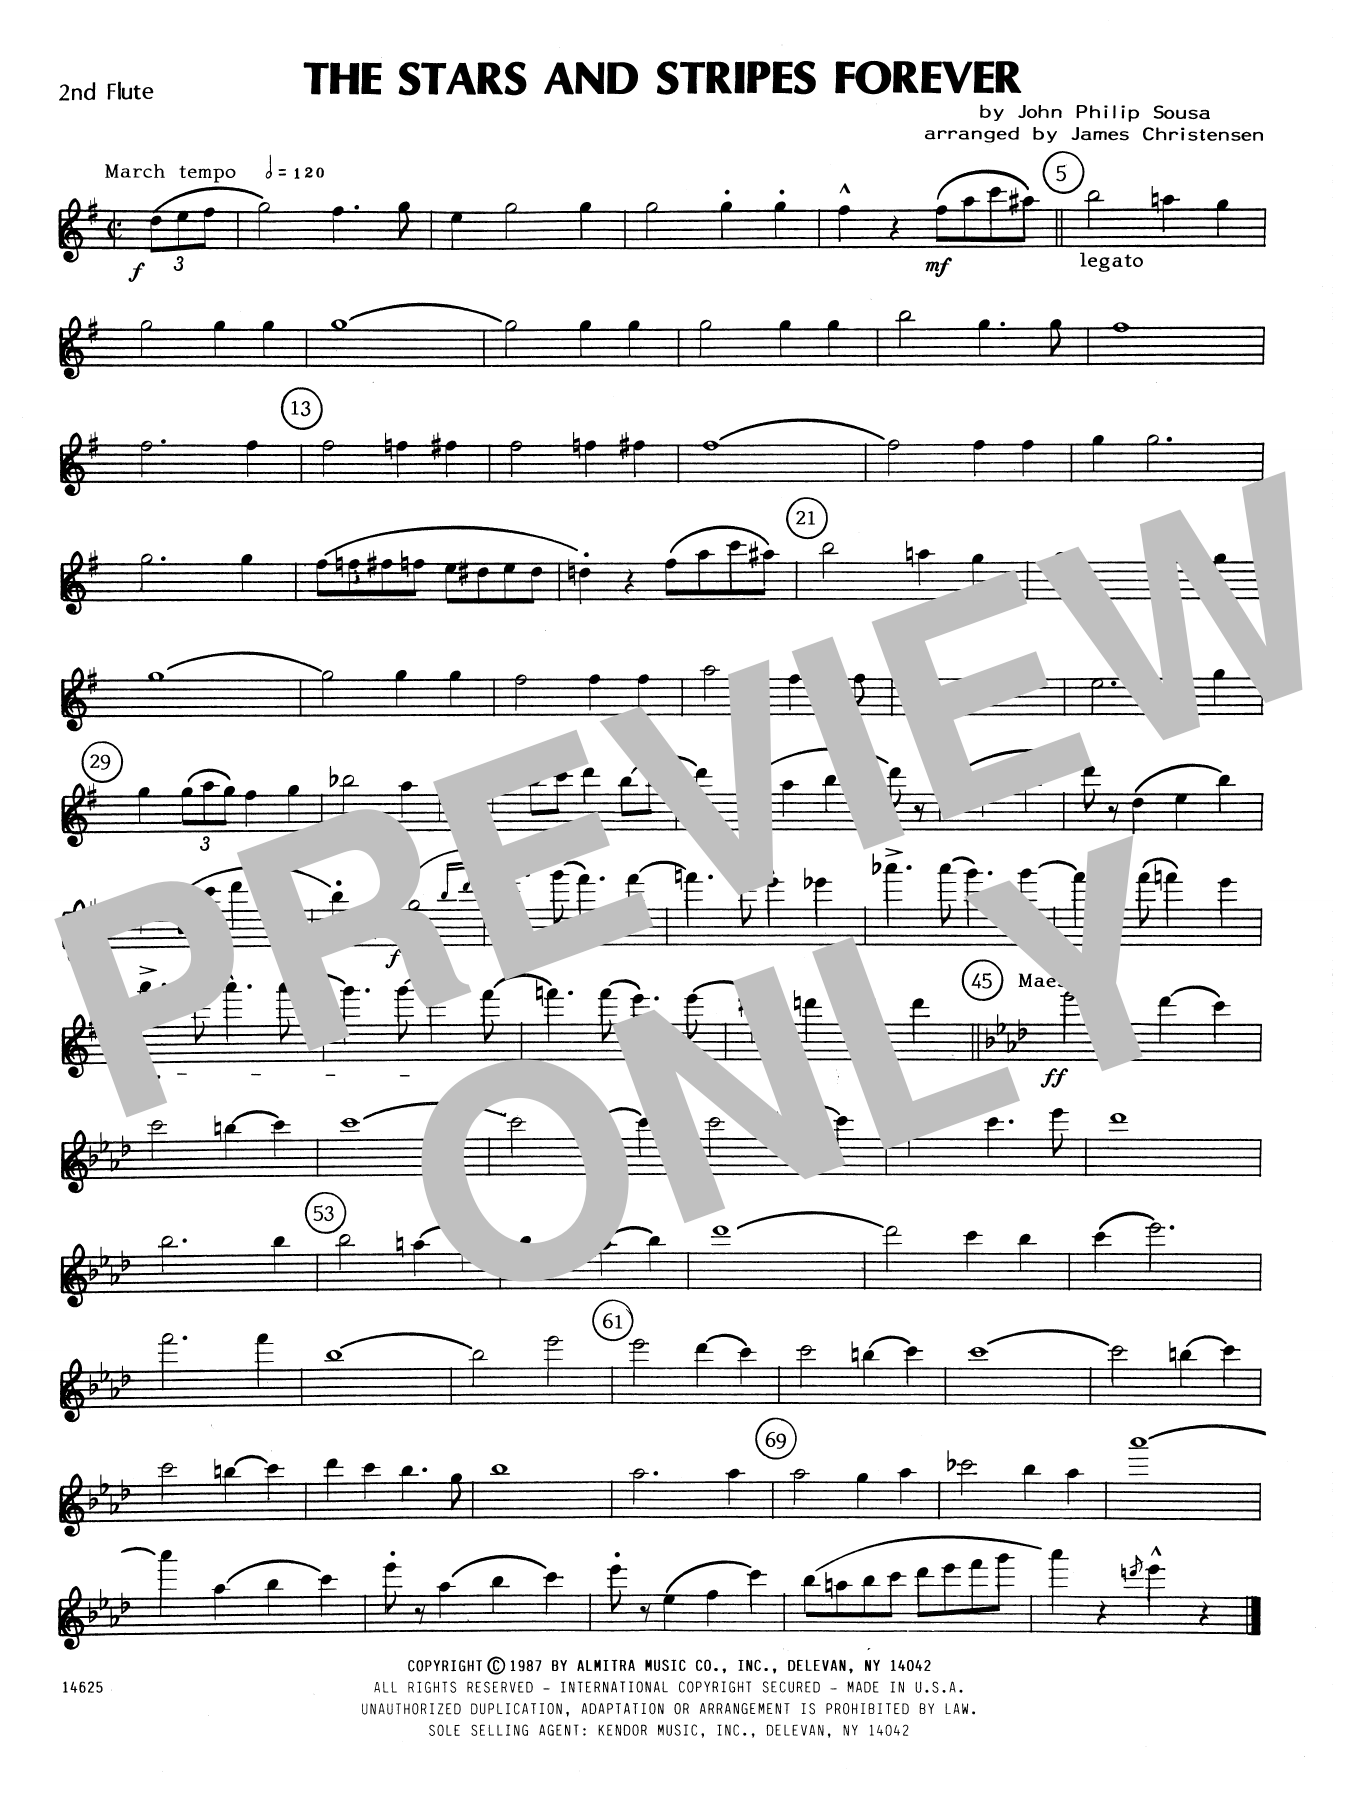 Download James Christensen The Stars and Stripes Forever - 2nd Flu Sheet Music